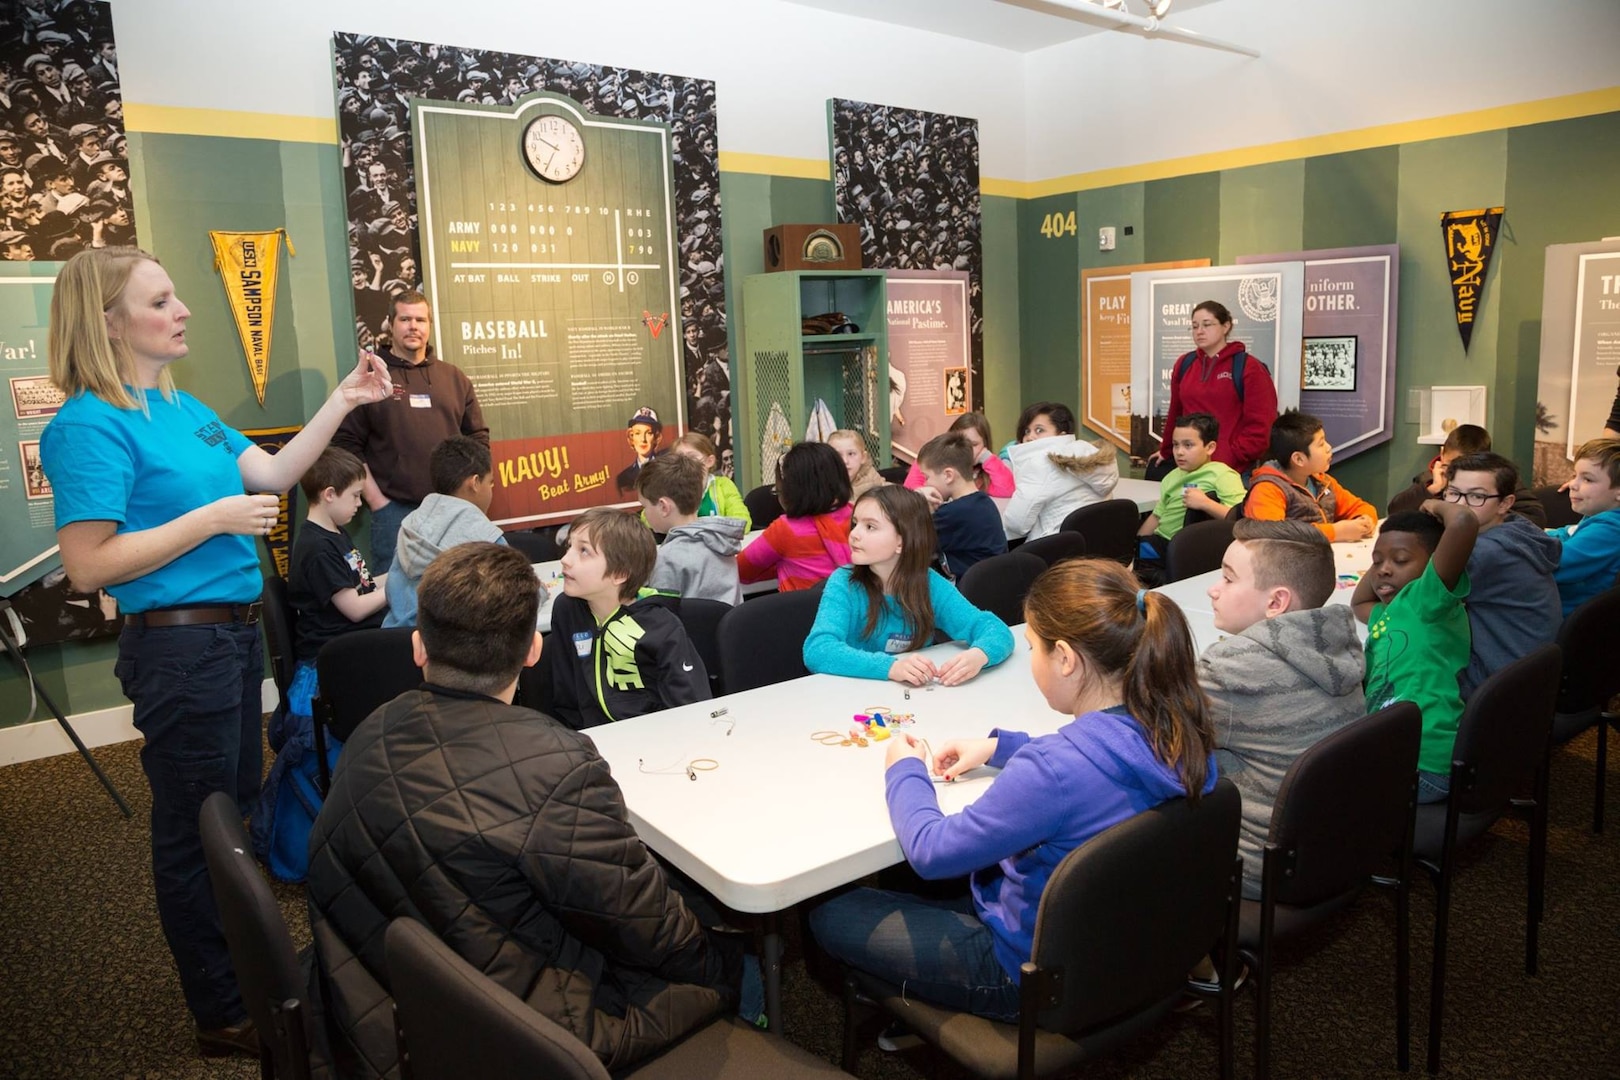 PSNS & IMF Science, Technology, Engineering, and Math Outreach Coordinator Corinne Beach shows students from Pinecrest Elementary School how to use a battery to demonstrate electrical circuitry during a Navy STEM event at the Puget Sound Navy Museum, March 17, 2017, in Bremerton, Washington. Volunteers from PSNS & IMF teamed up with Puget Sound Navy Museum staff to hold a two-day STEM outreach event for local students at the museum March 16-17. (U.S. Navy photo by Zachary Frank, PSNS & IMF photographer)